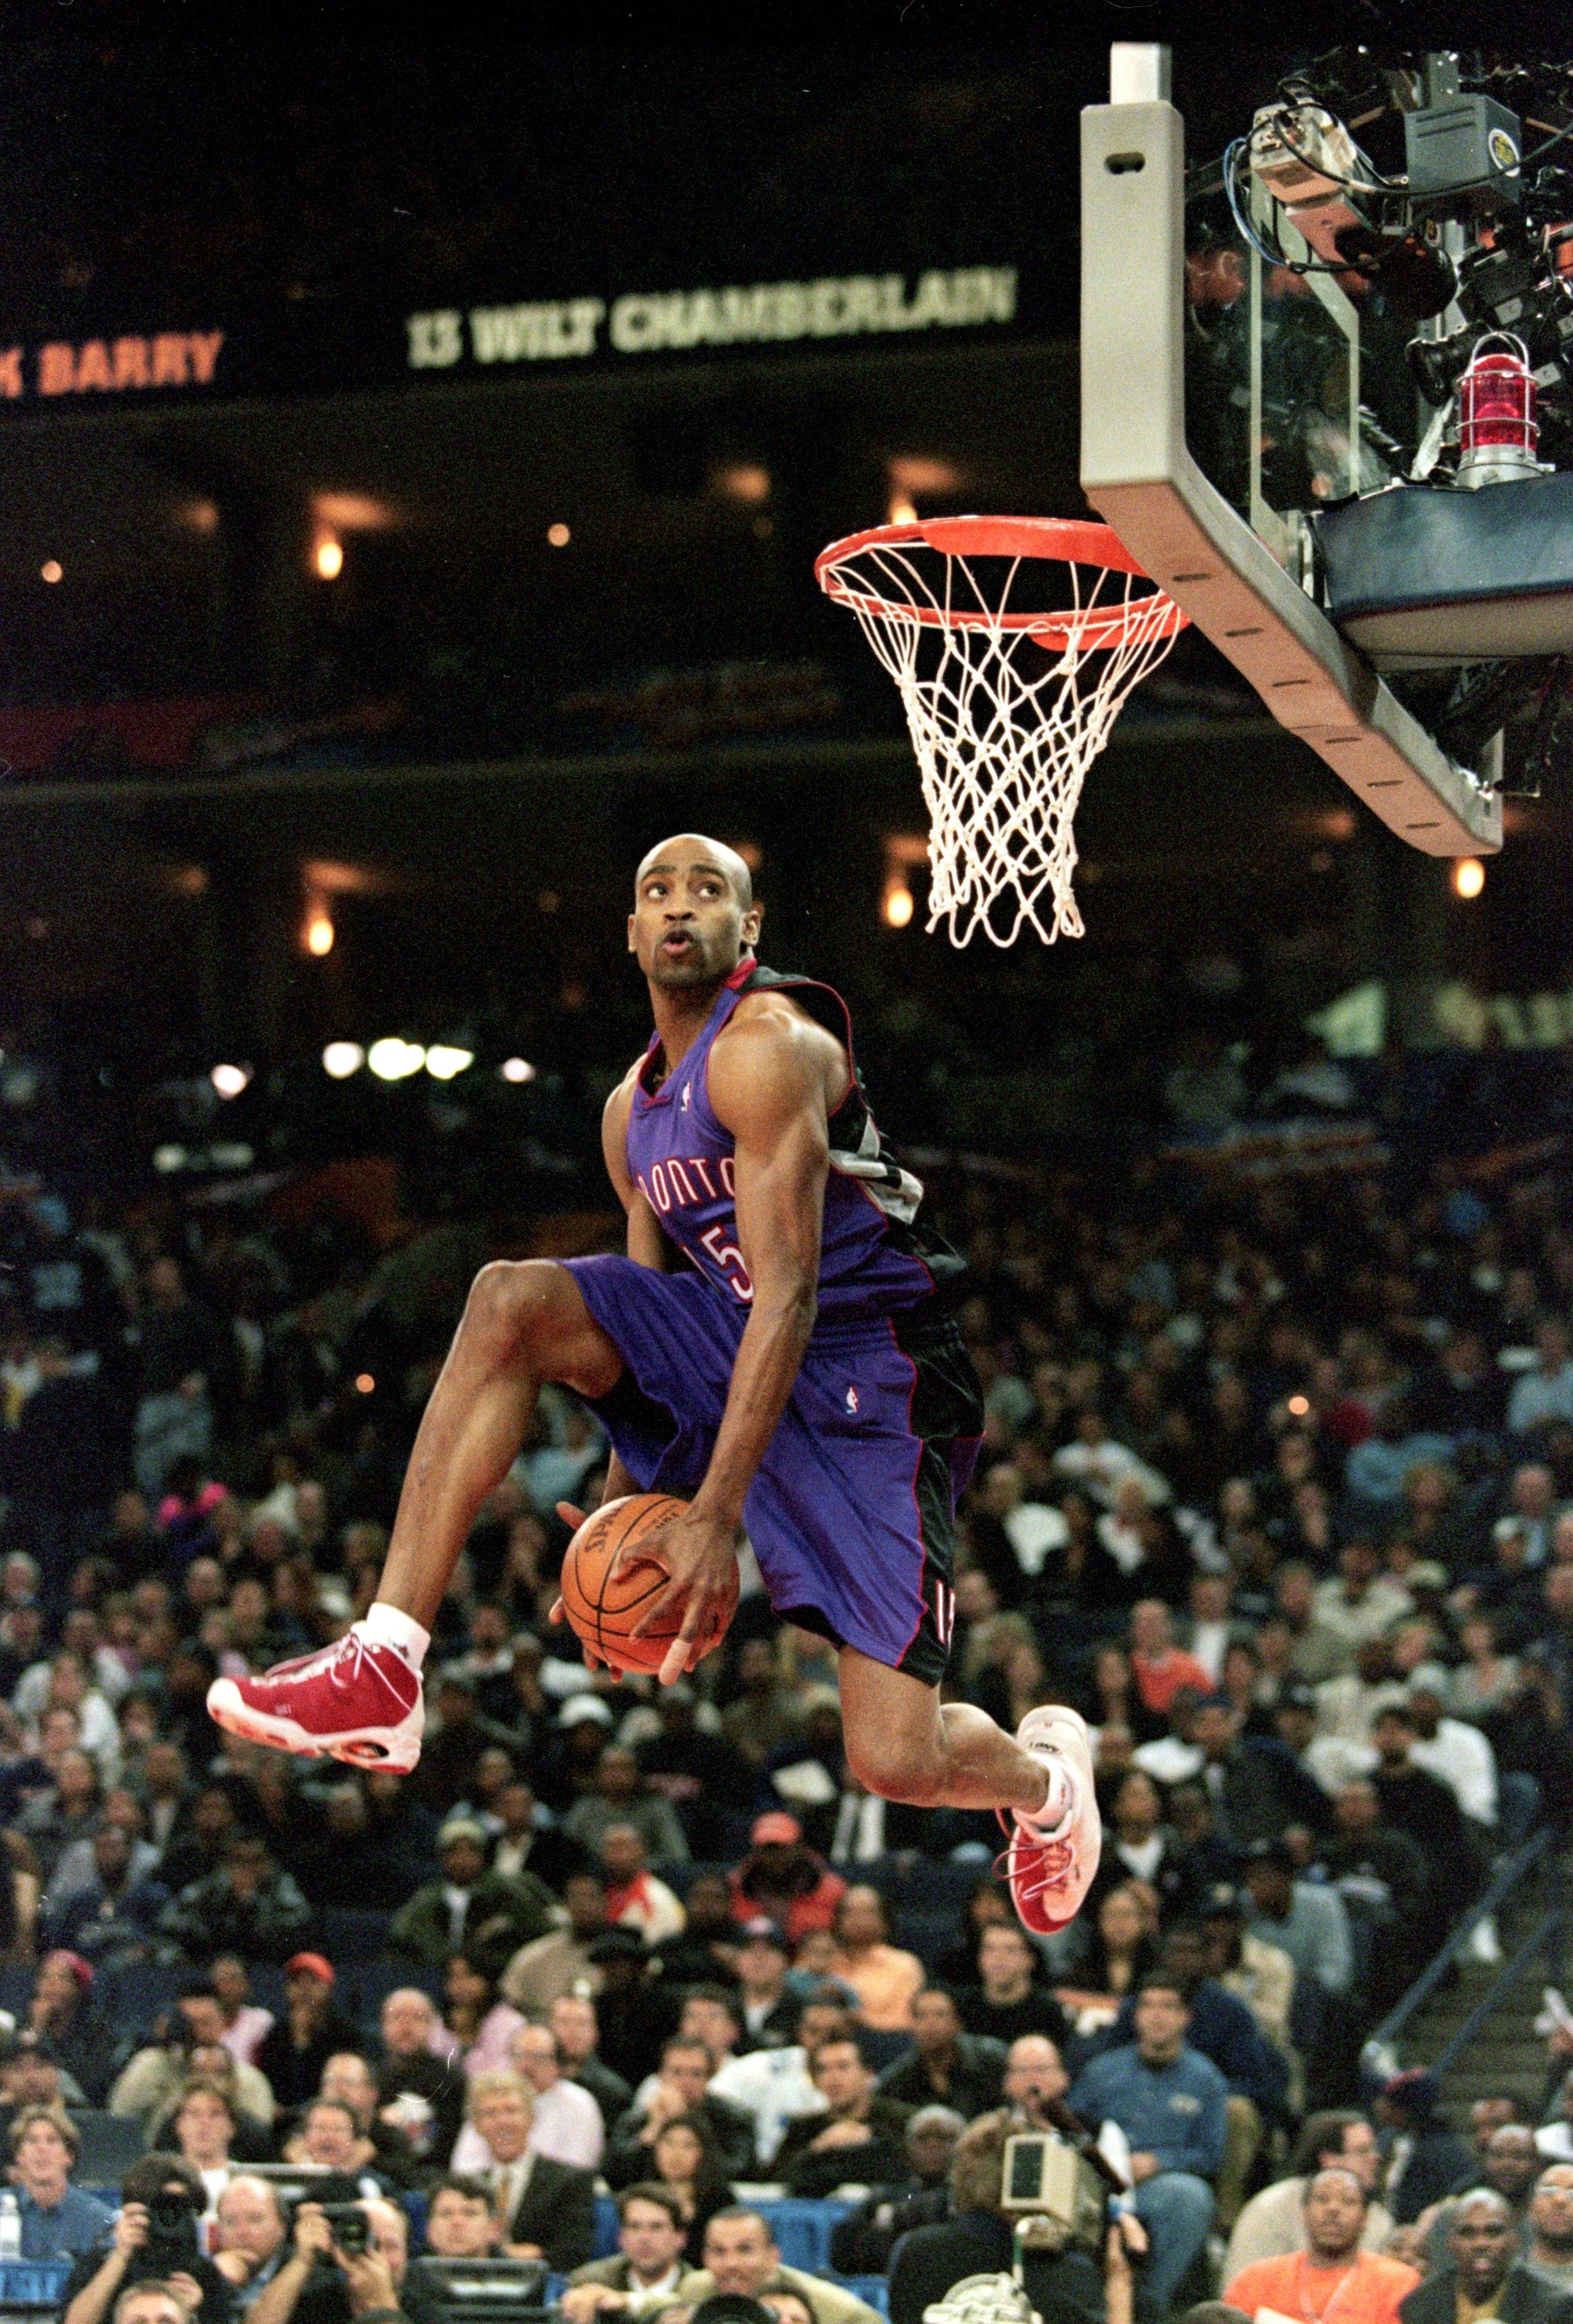 The best photo from Vince Carter's legendary dunk contest performance 20 years ago